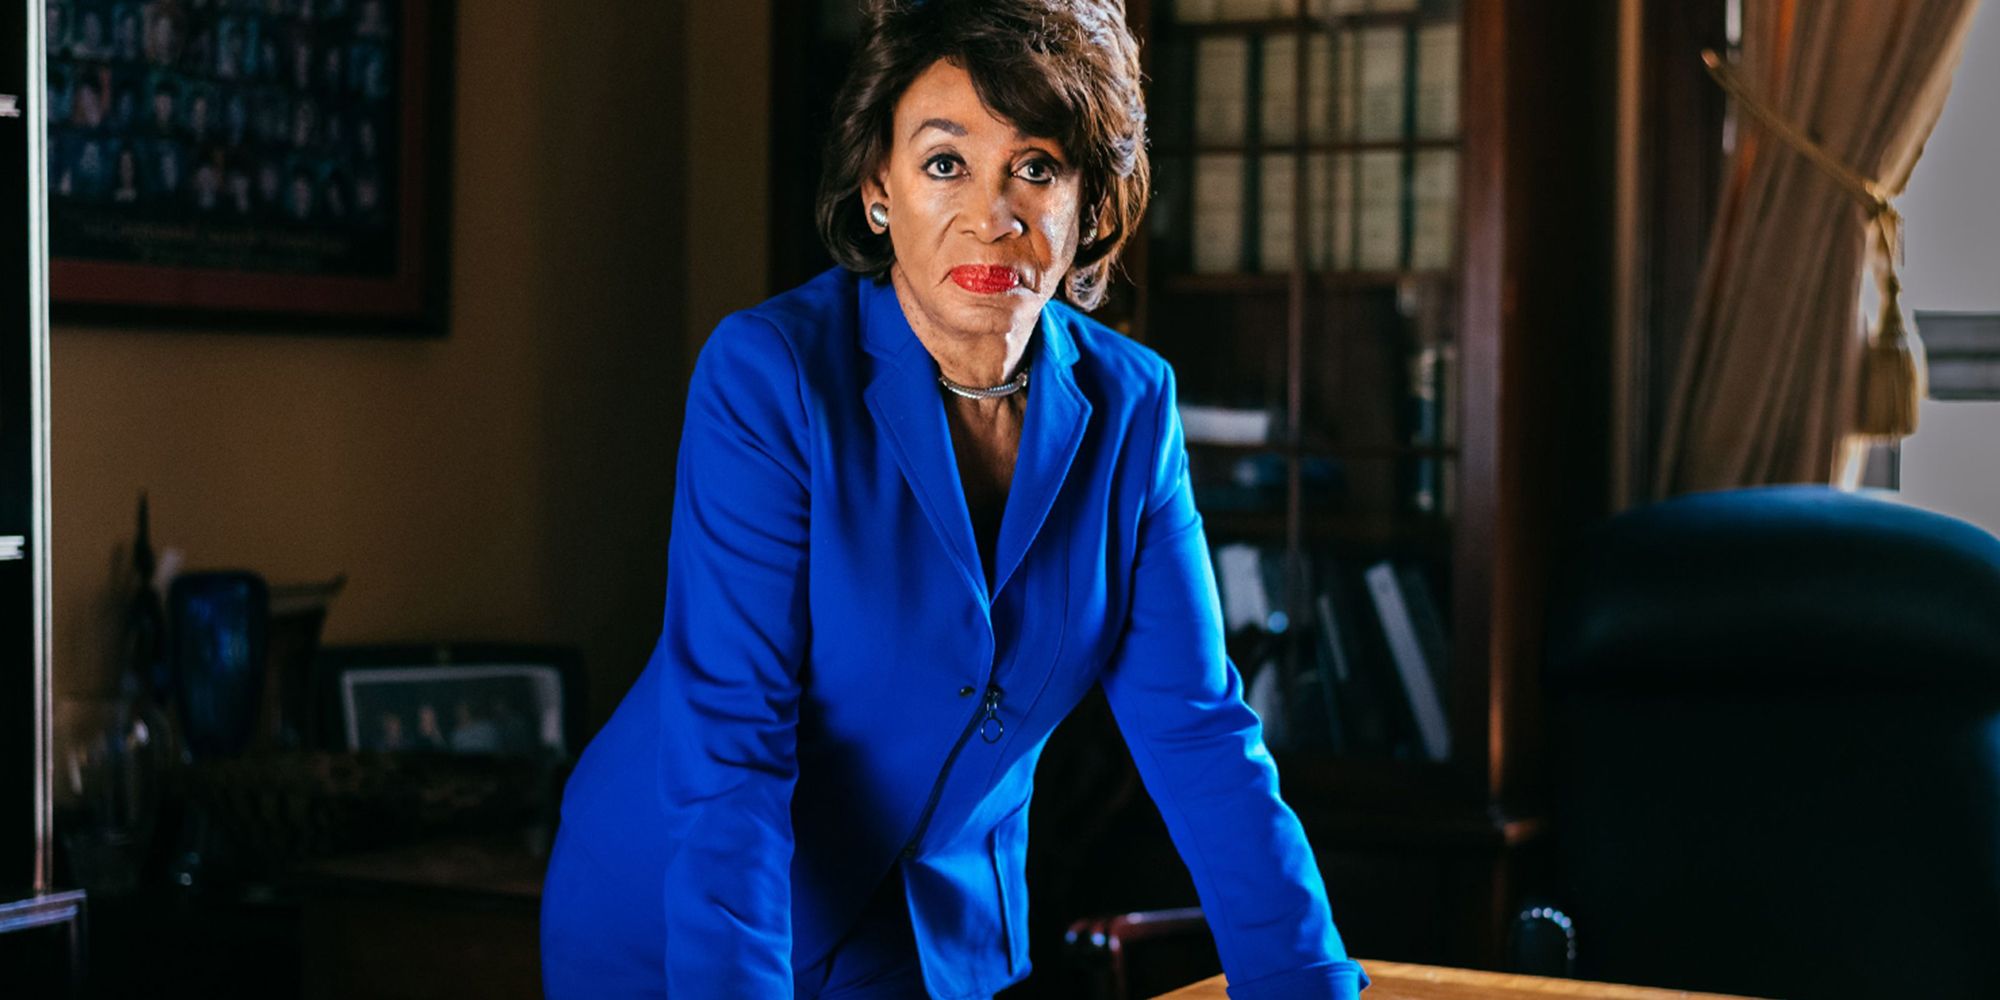 Profile: Rep. Maxine Waters On Trump, Impeachment, and Speaking Her Mind